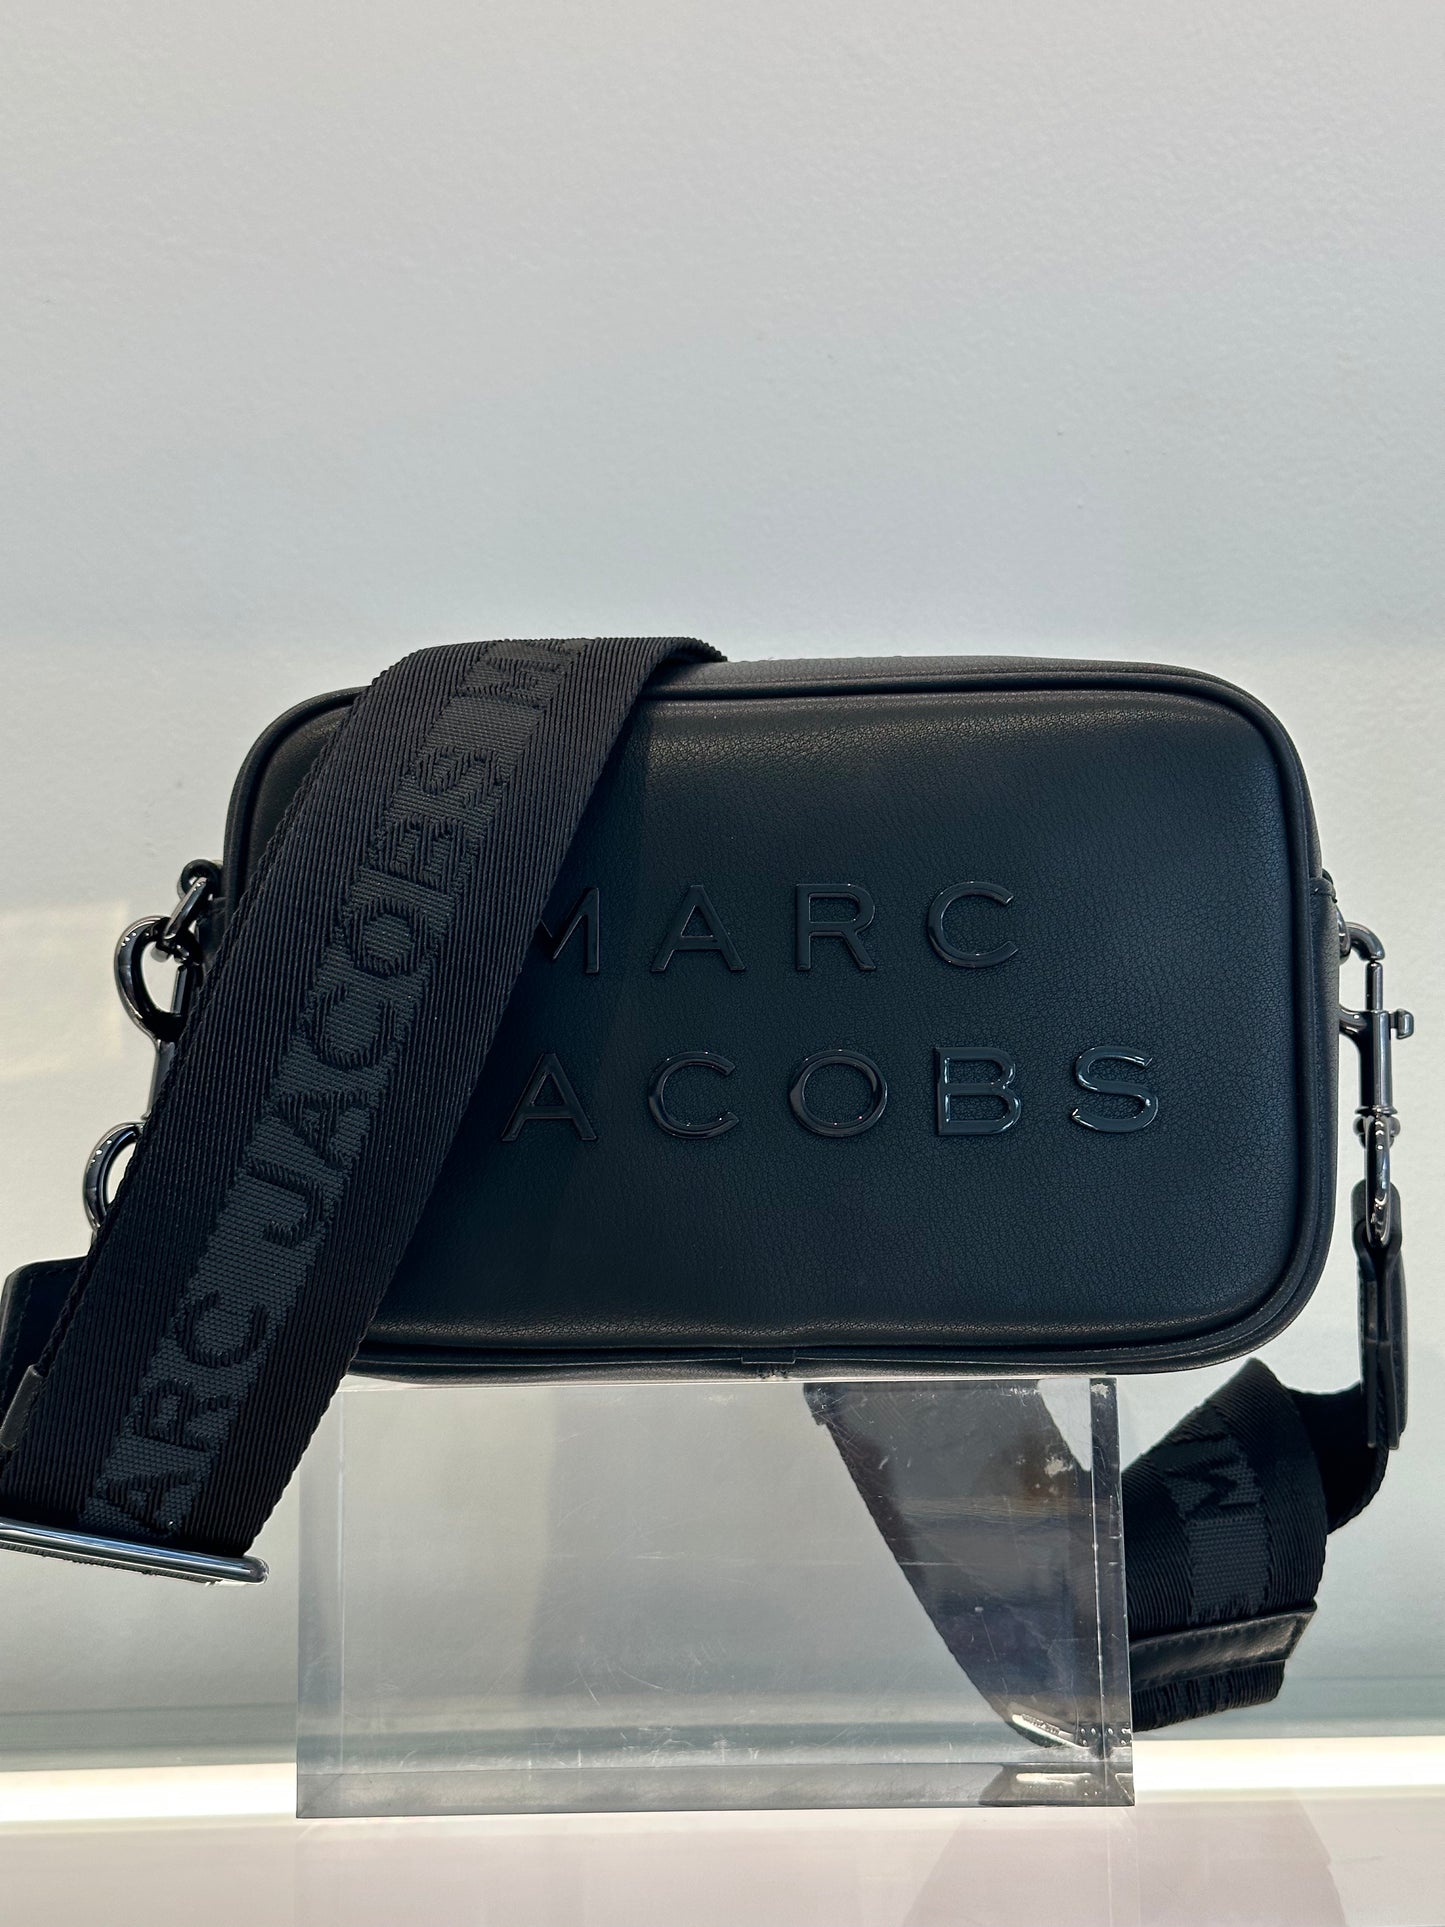 Marc Jacobs Flash Leather Crossbody Bag (NEW STYLE)